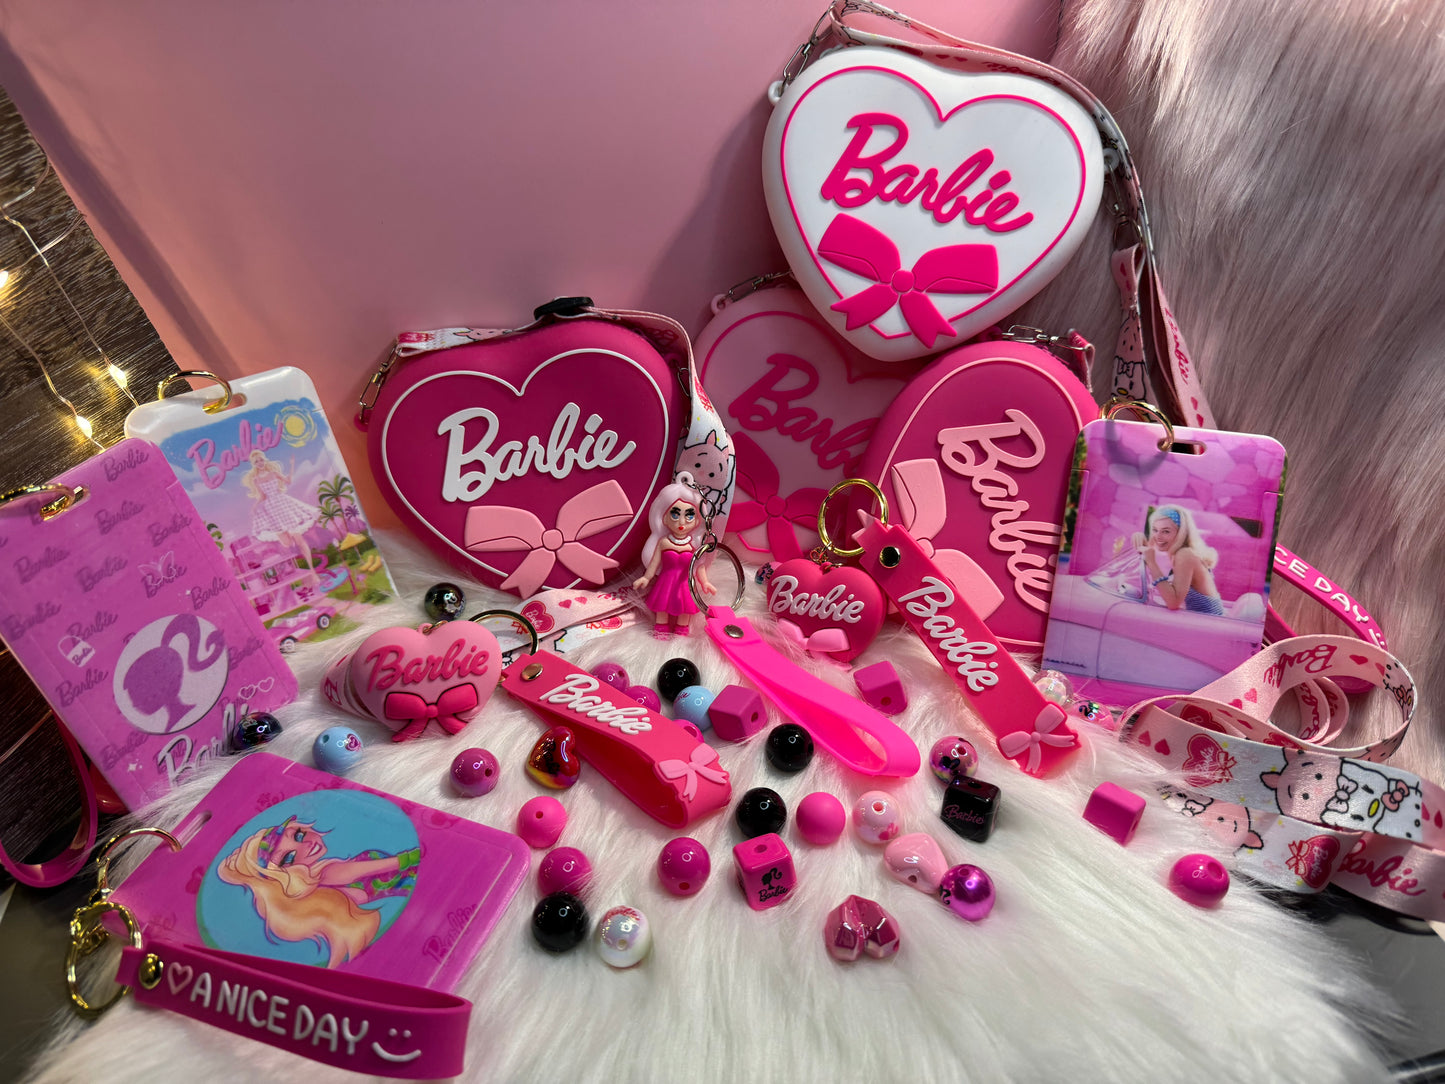 Barbie Purse and Accessories